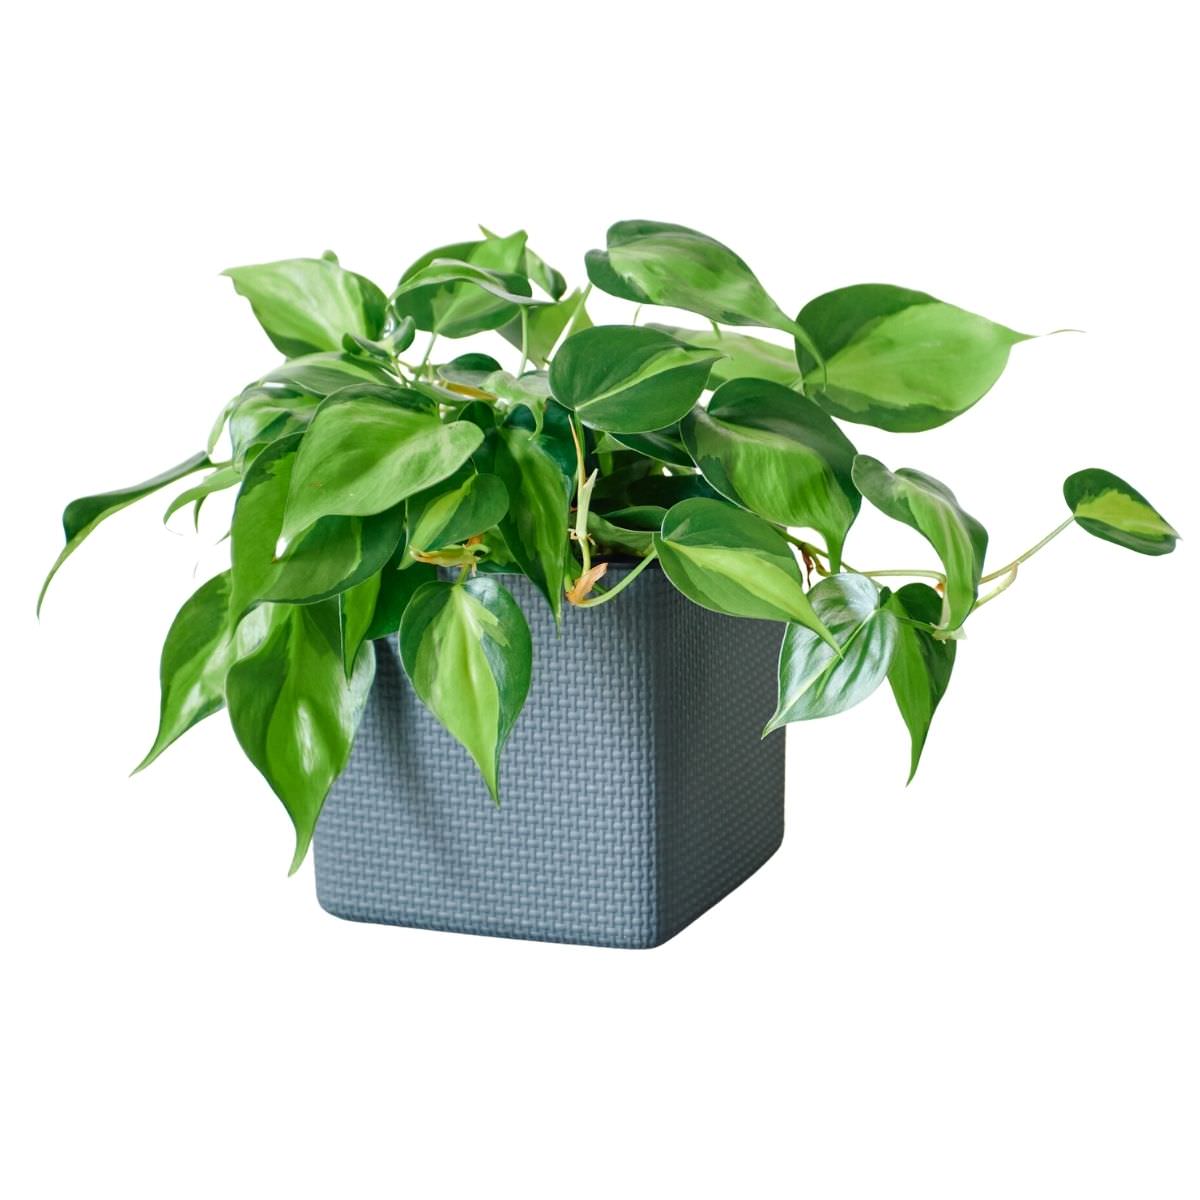 Philodendron Brasil Placed In Lechuza Cube 16 planter - Slate - My City Plants